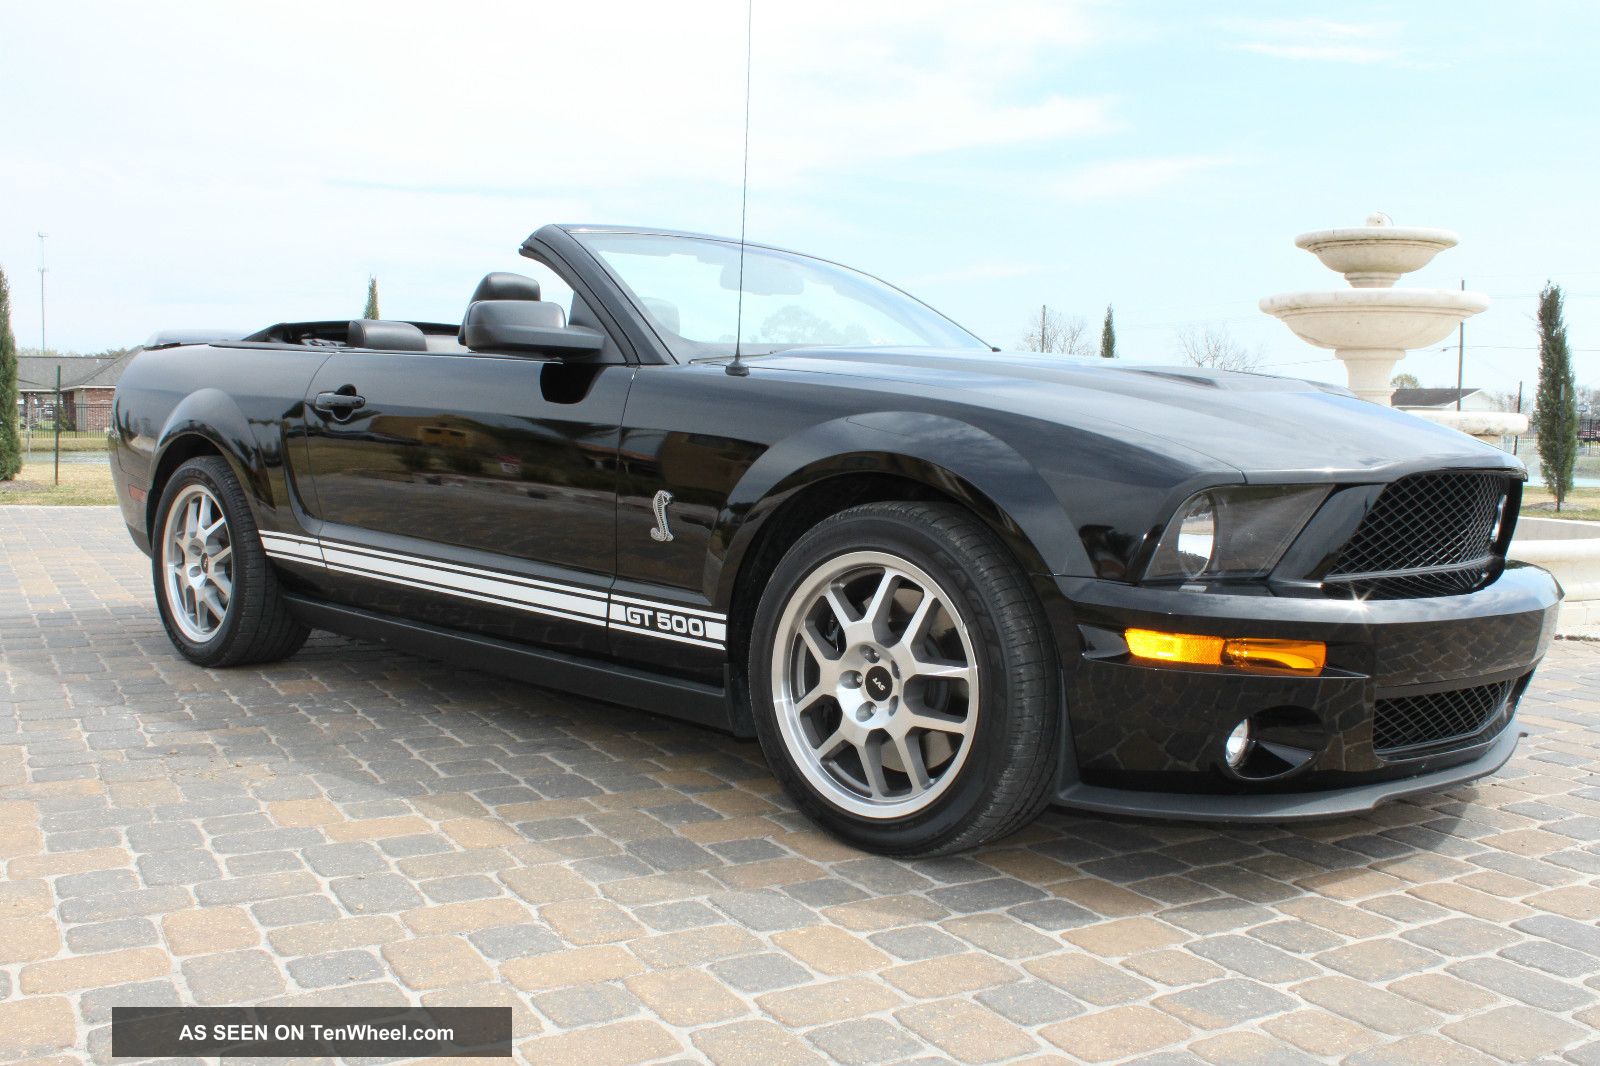 2007 Ford mustang shelby gt500 convertible review #4